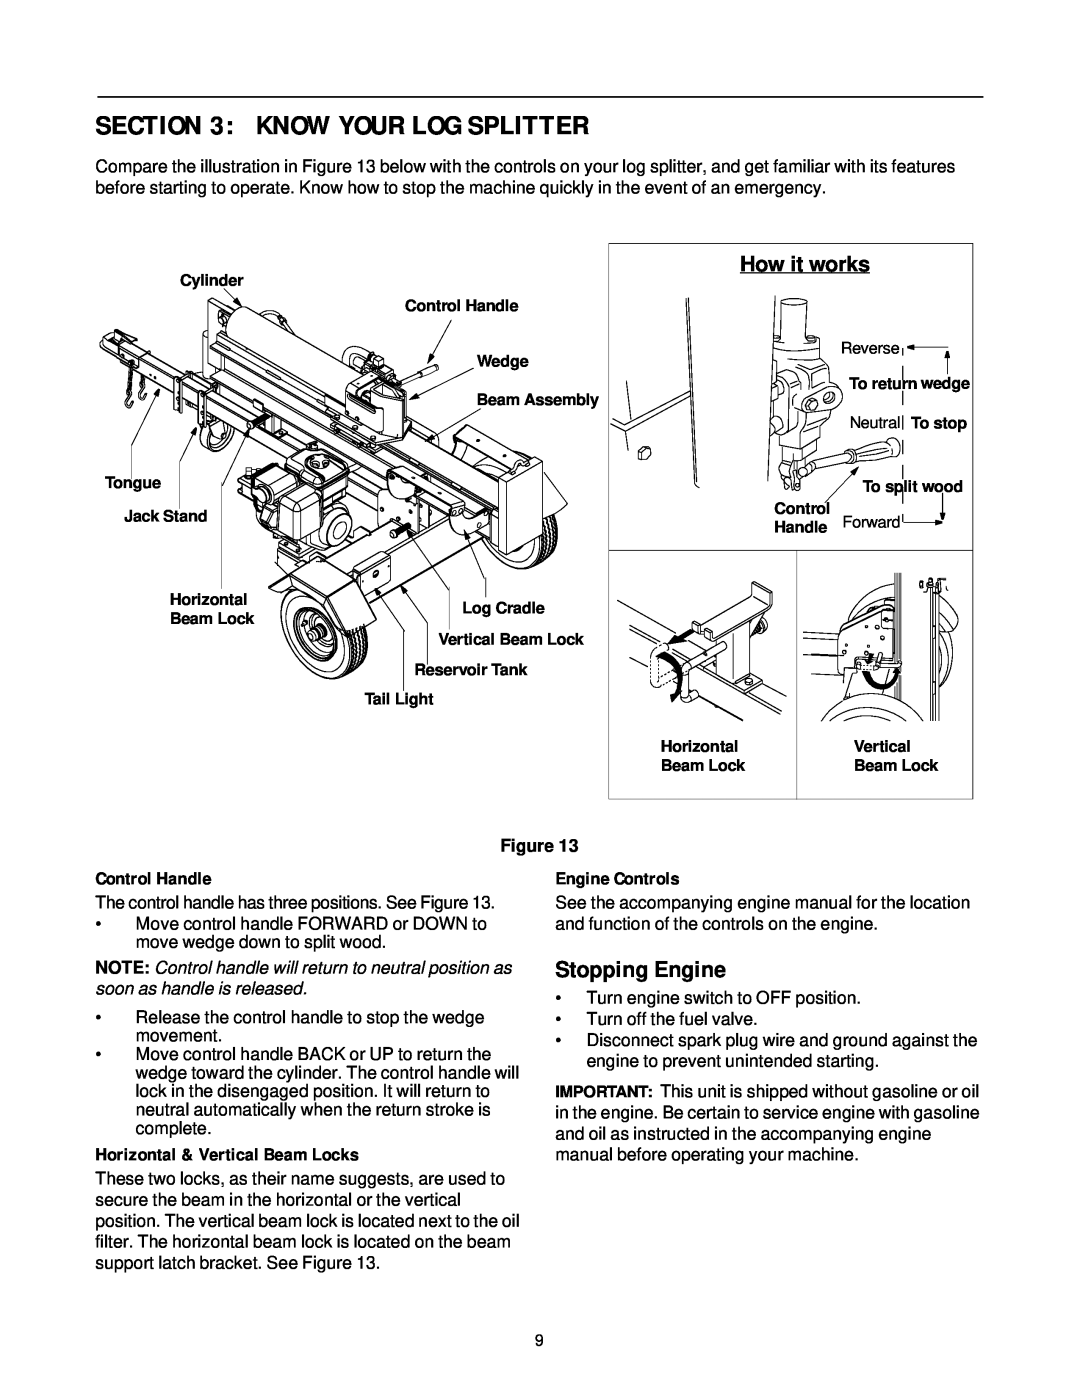 Troy-Bilt LS338 Know Your Log Splitter, Stopping Engine, How it works, Control Handle, Horizontal & Vertical Beam Locks 